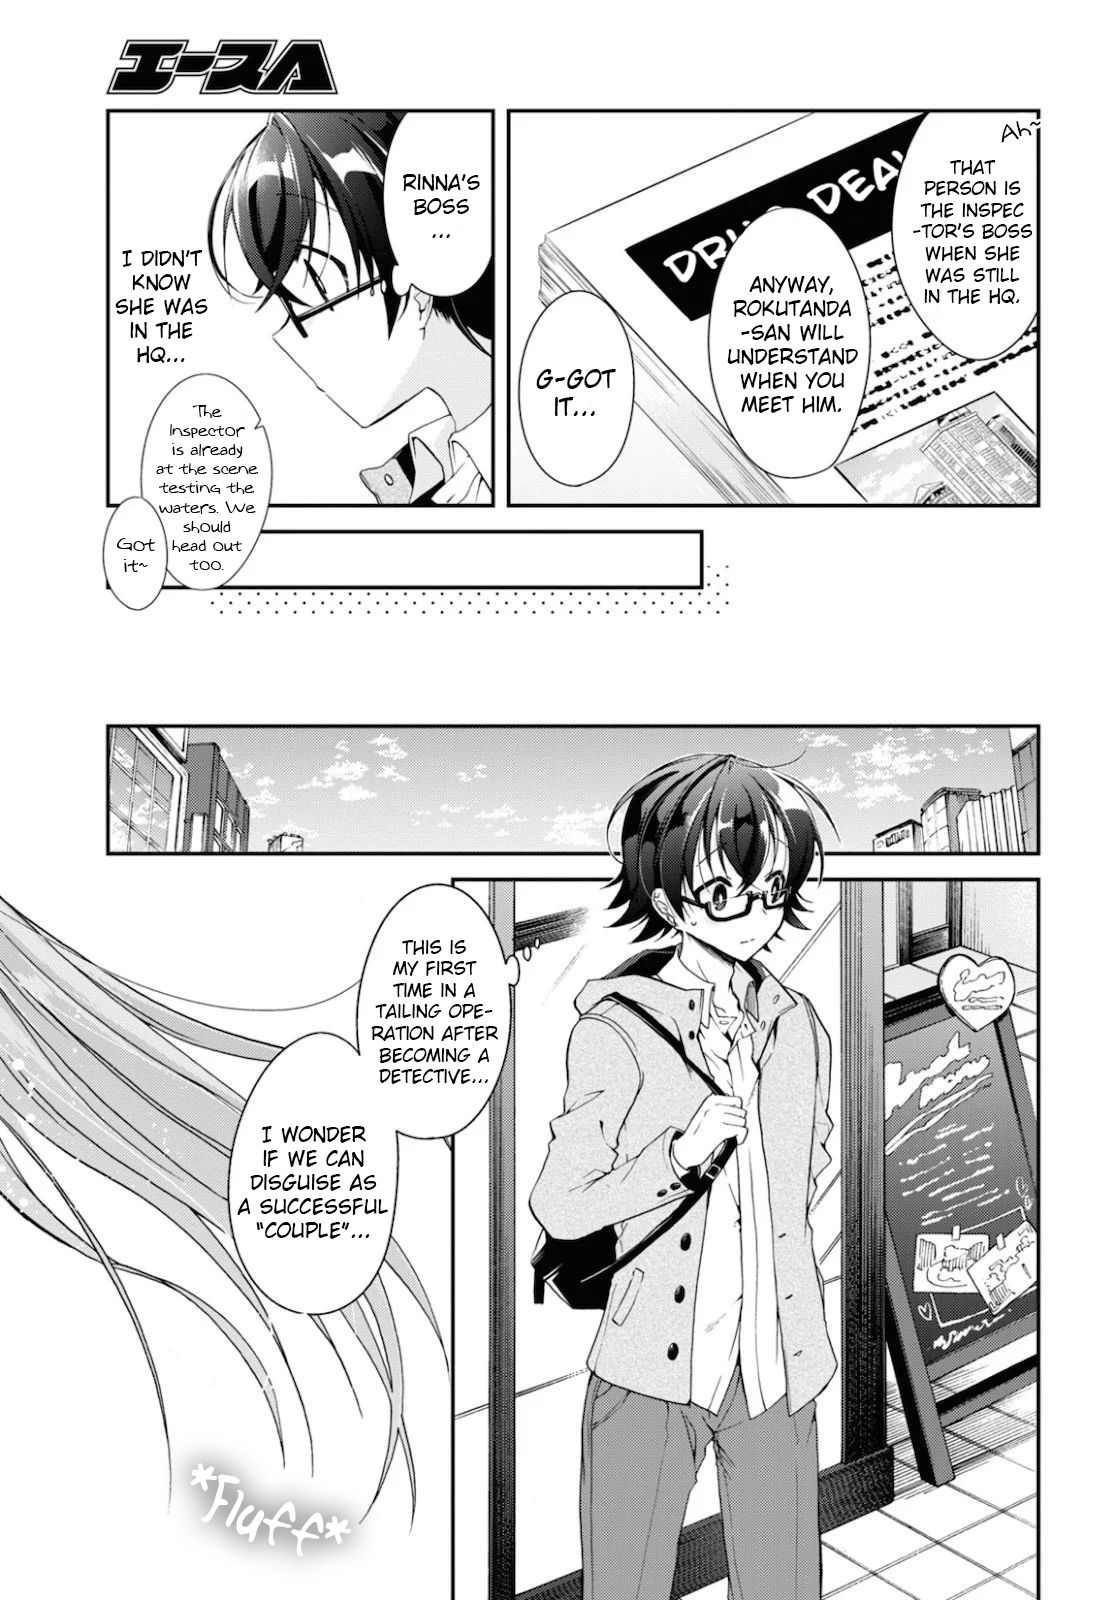 Isshiki-san Wants to Know About Love. - chapter 5 - #3